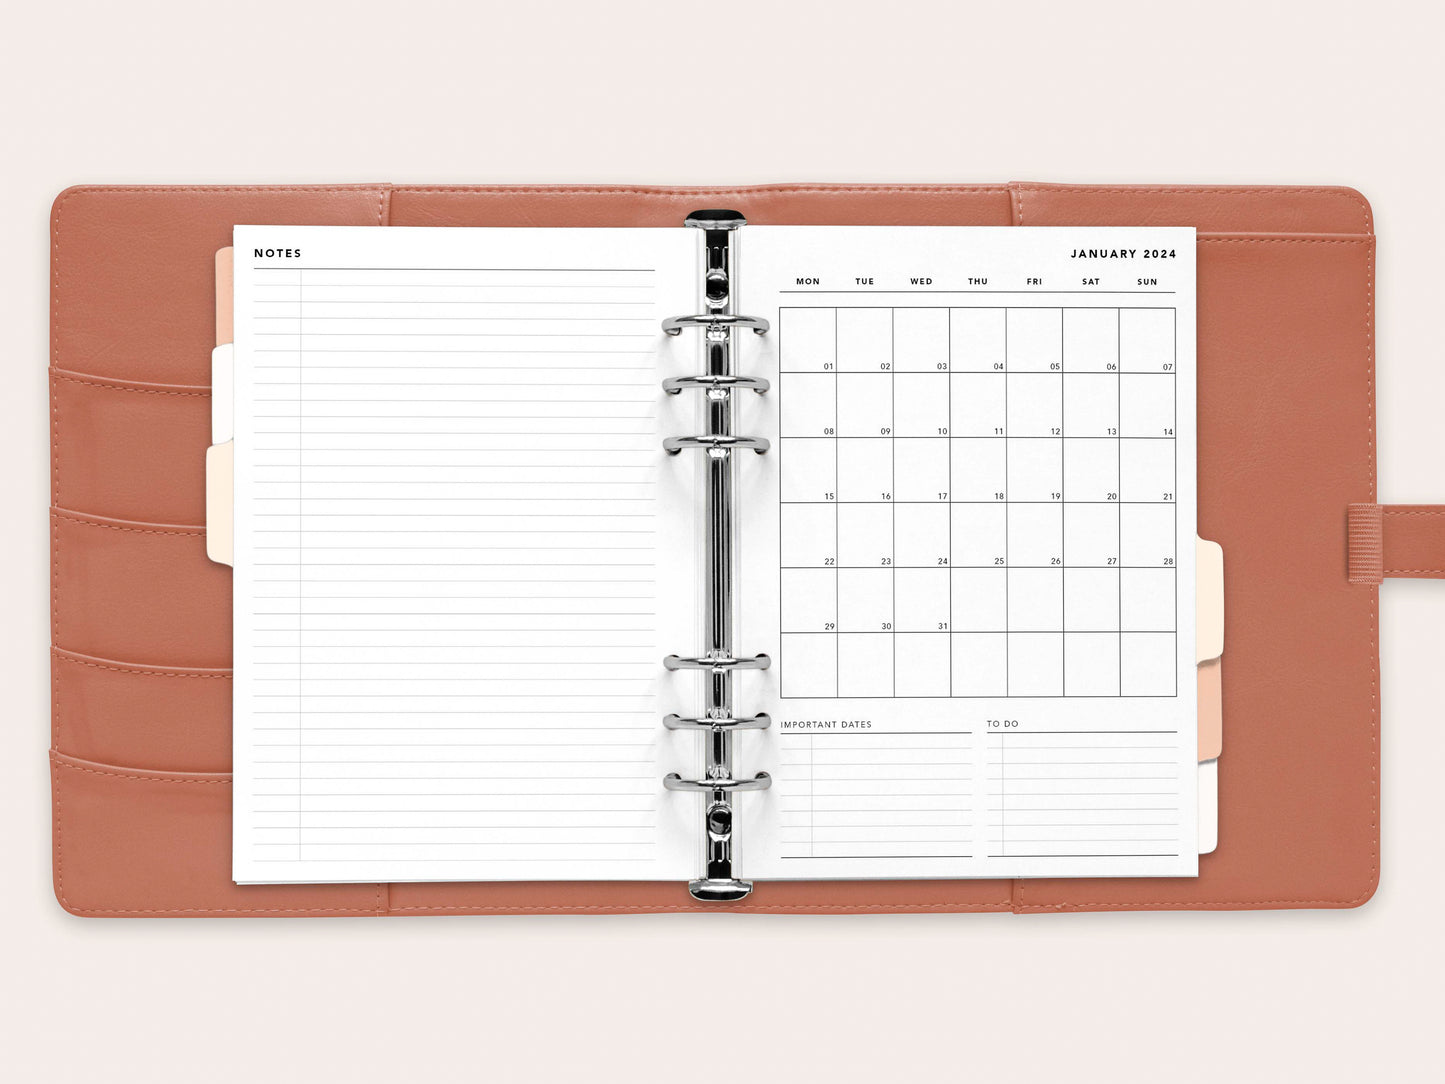 Printed: 2024 Monthly Planner No. 1